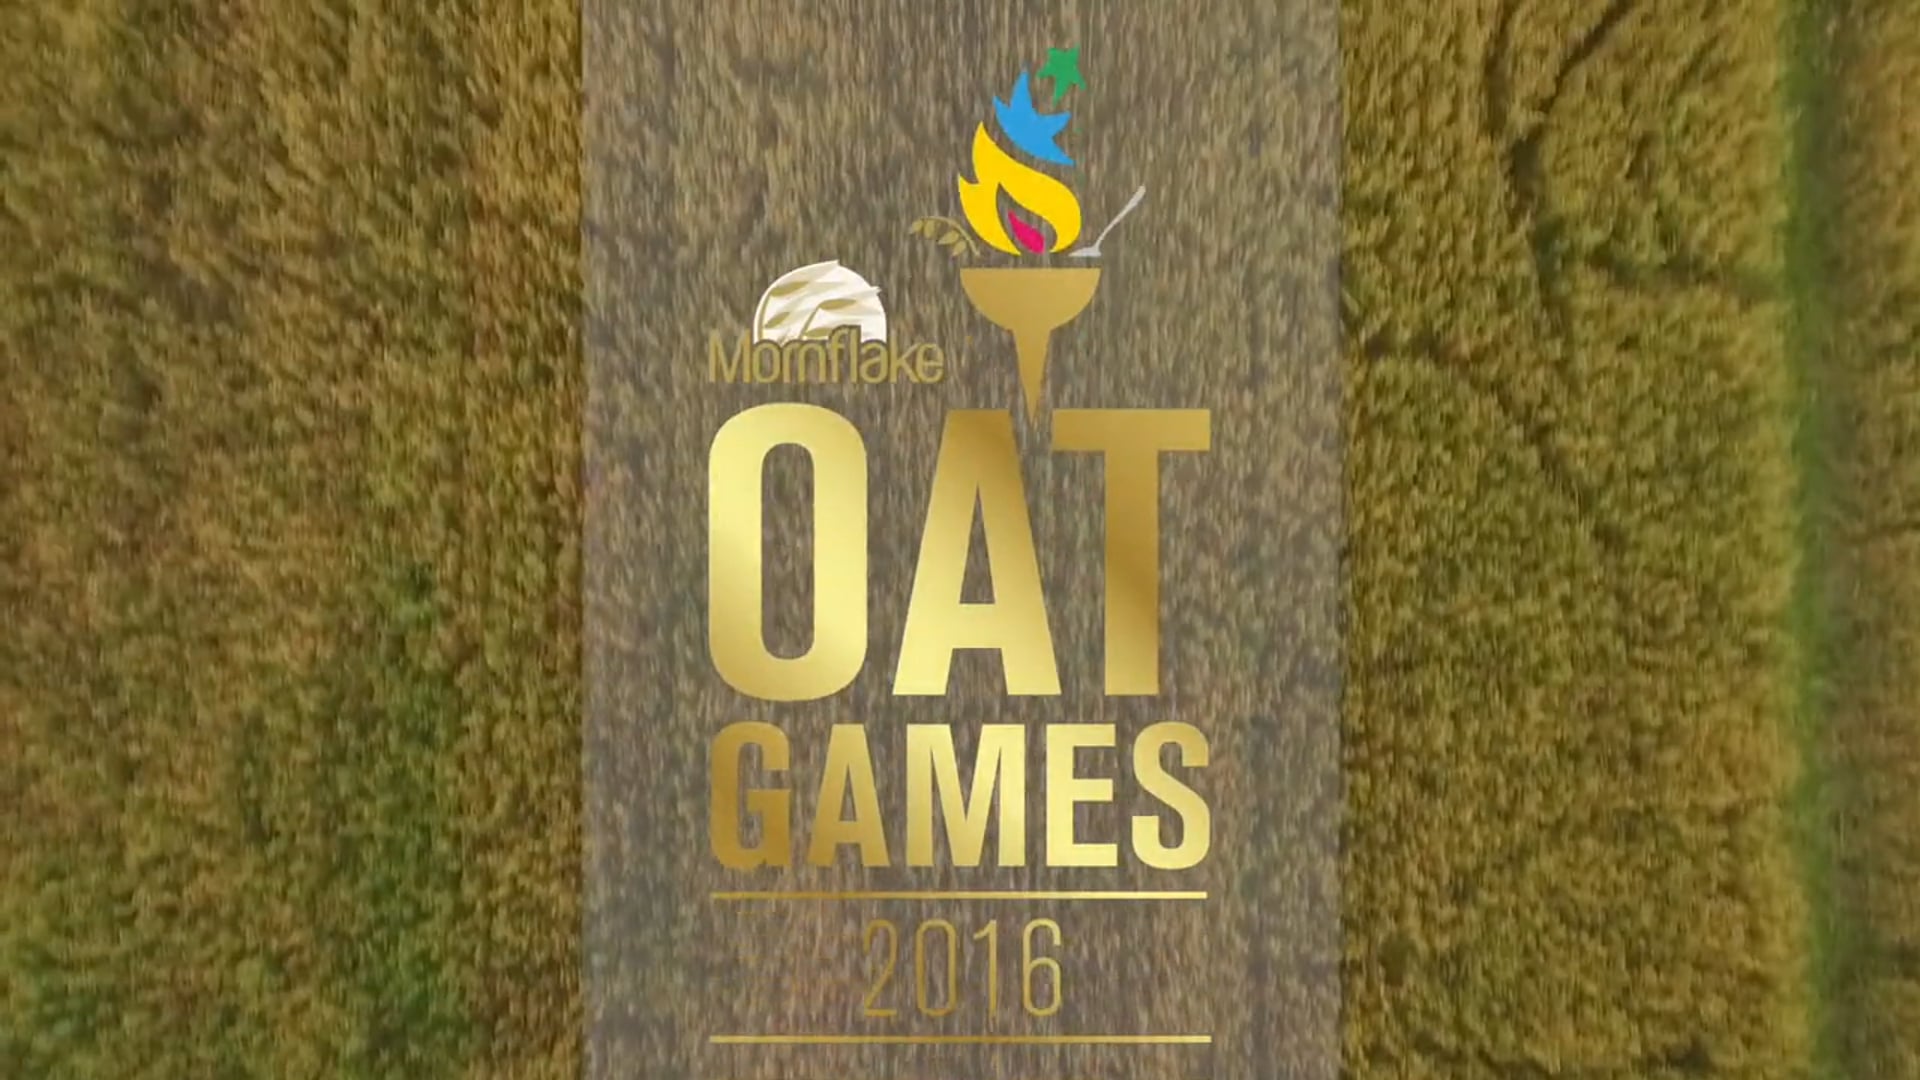 The Oat Games - Mornflake 2016